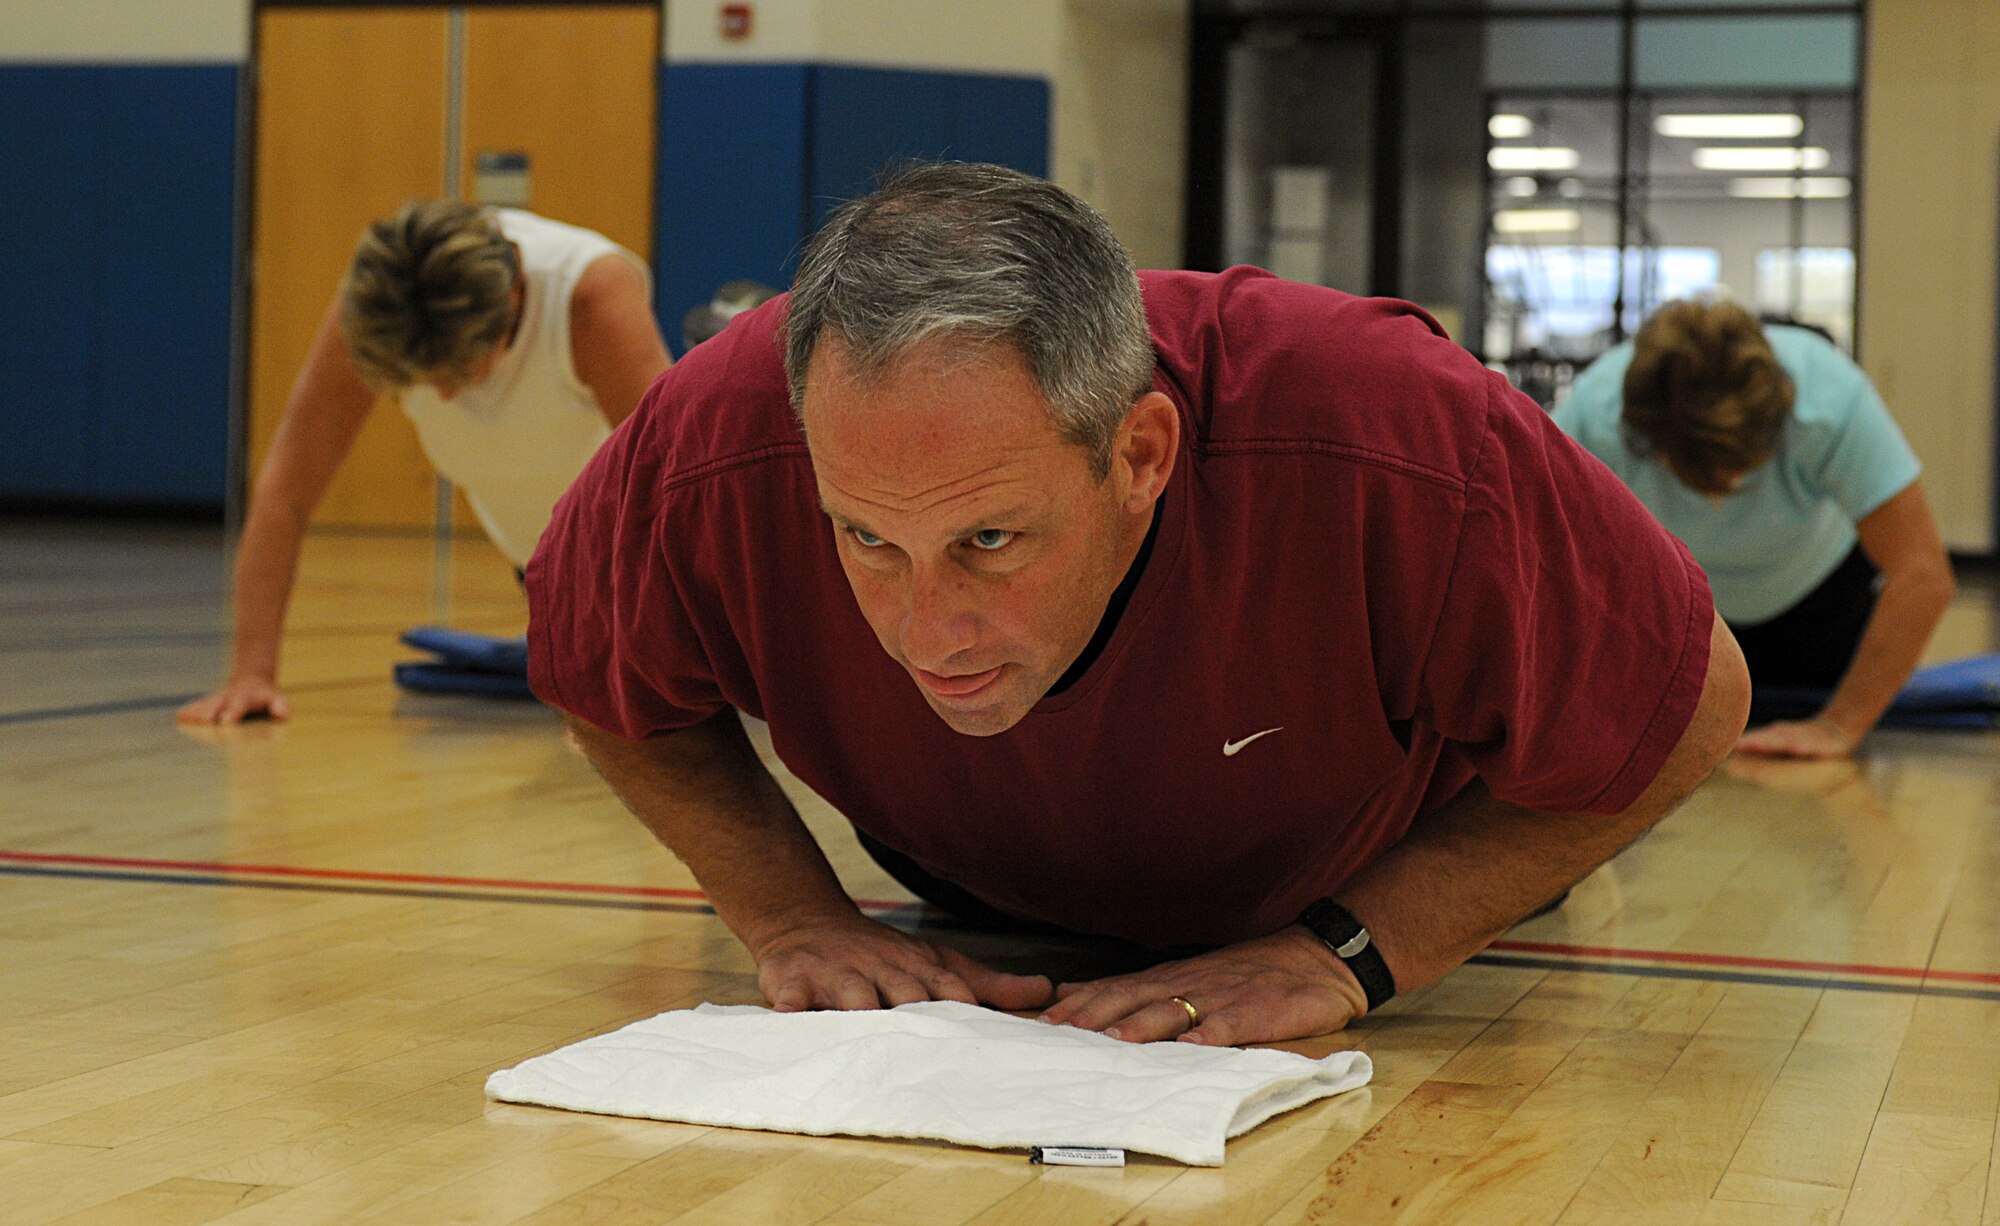 U.S. Air Force Col. Greg Williams, 355th Mission Support Group commander, performs a diamond pushup during the physical training portion of the Commander's 101/Surviving the Holidays course hosted by the Health and Wellness Center on Davis-Monthan Air Force Base, Ariz., Nov. 14, 2012. The course involved a PT class and a cooking demonstration led by members of the HAWC's staff. (U.S. Air Force photo by Senior Airman Timothy Moore/Released)